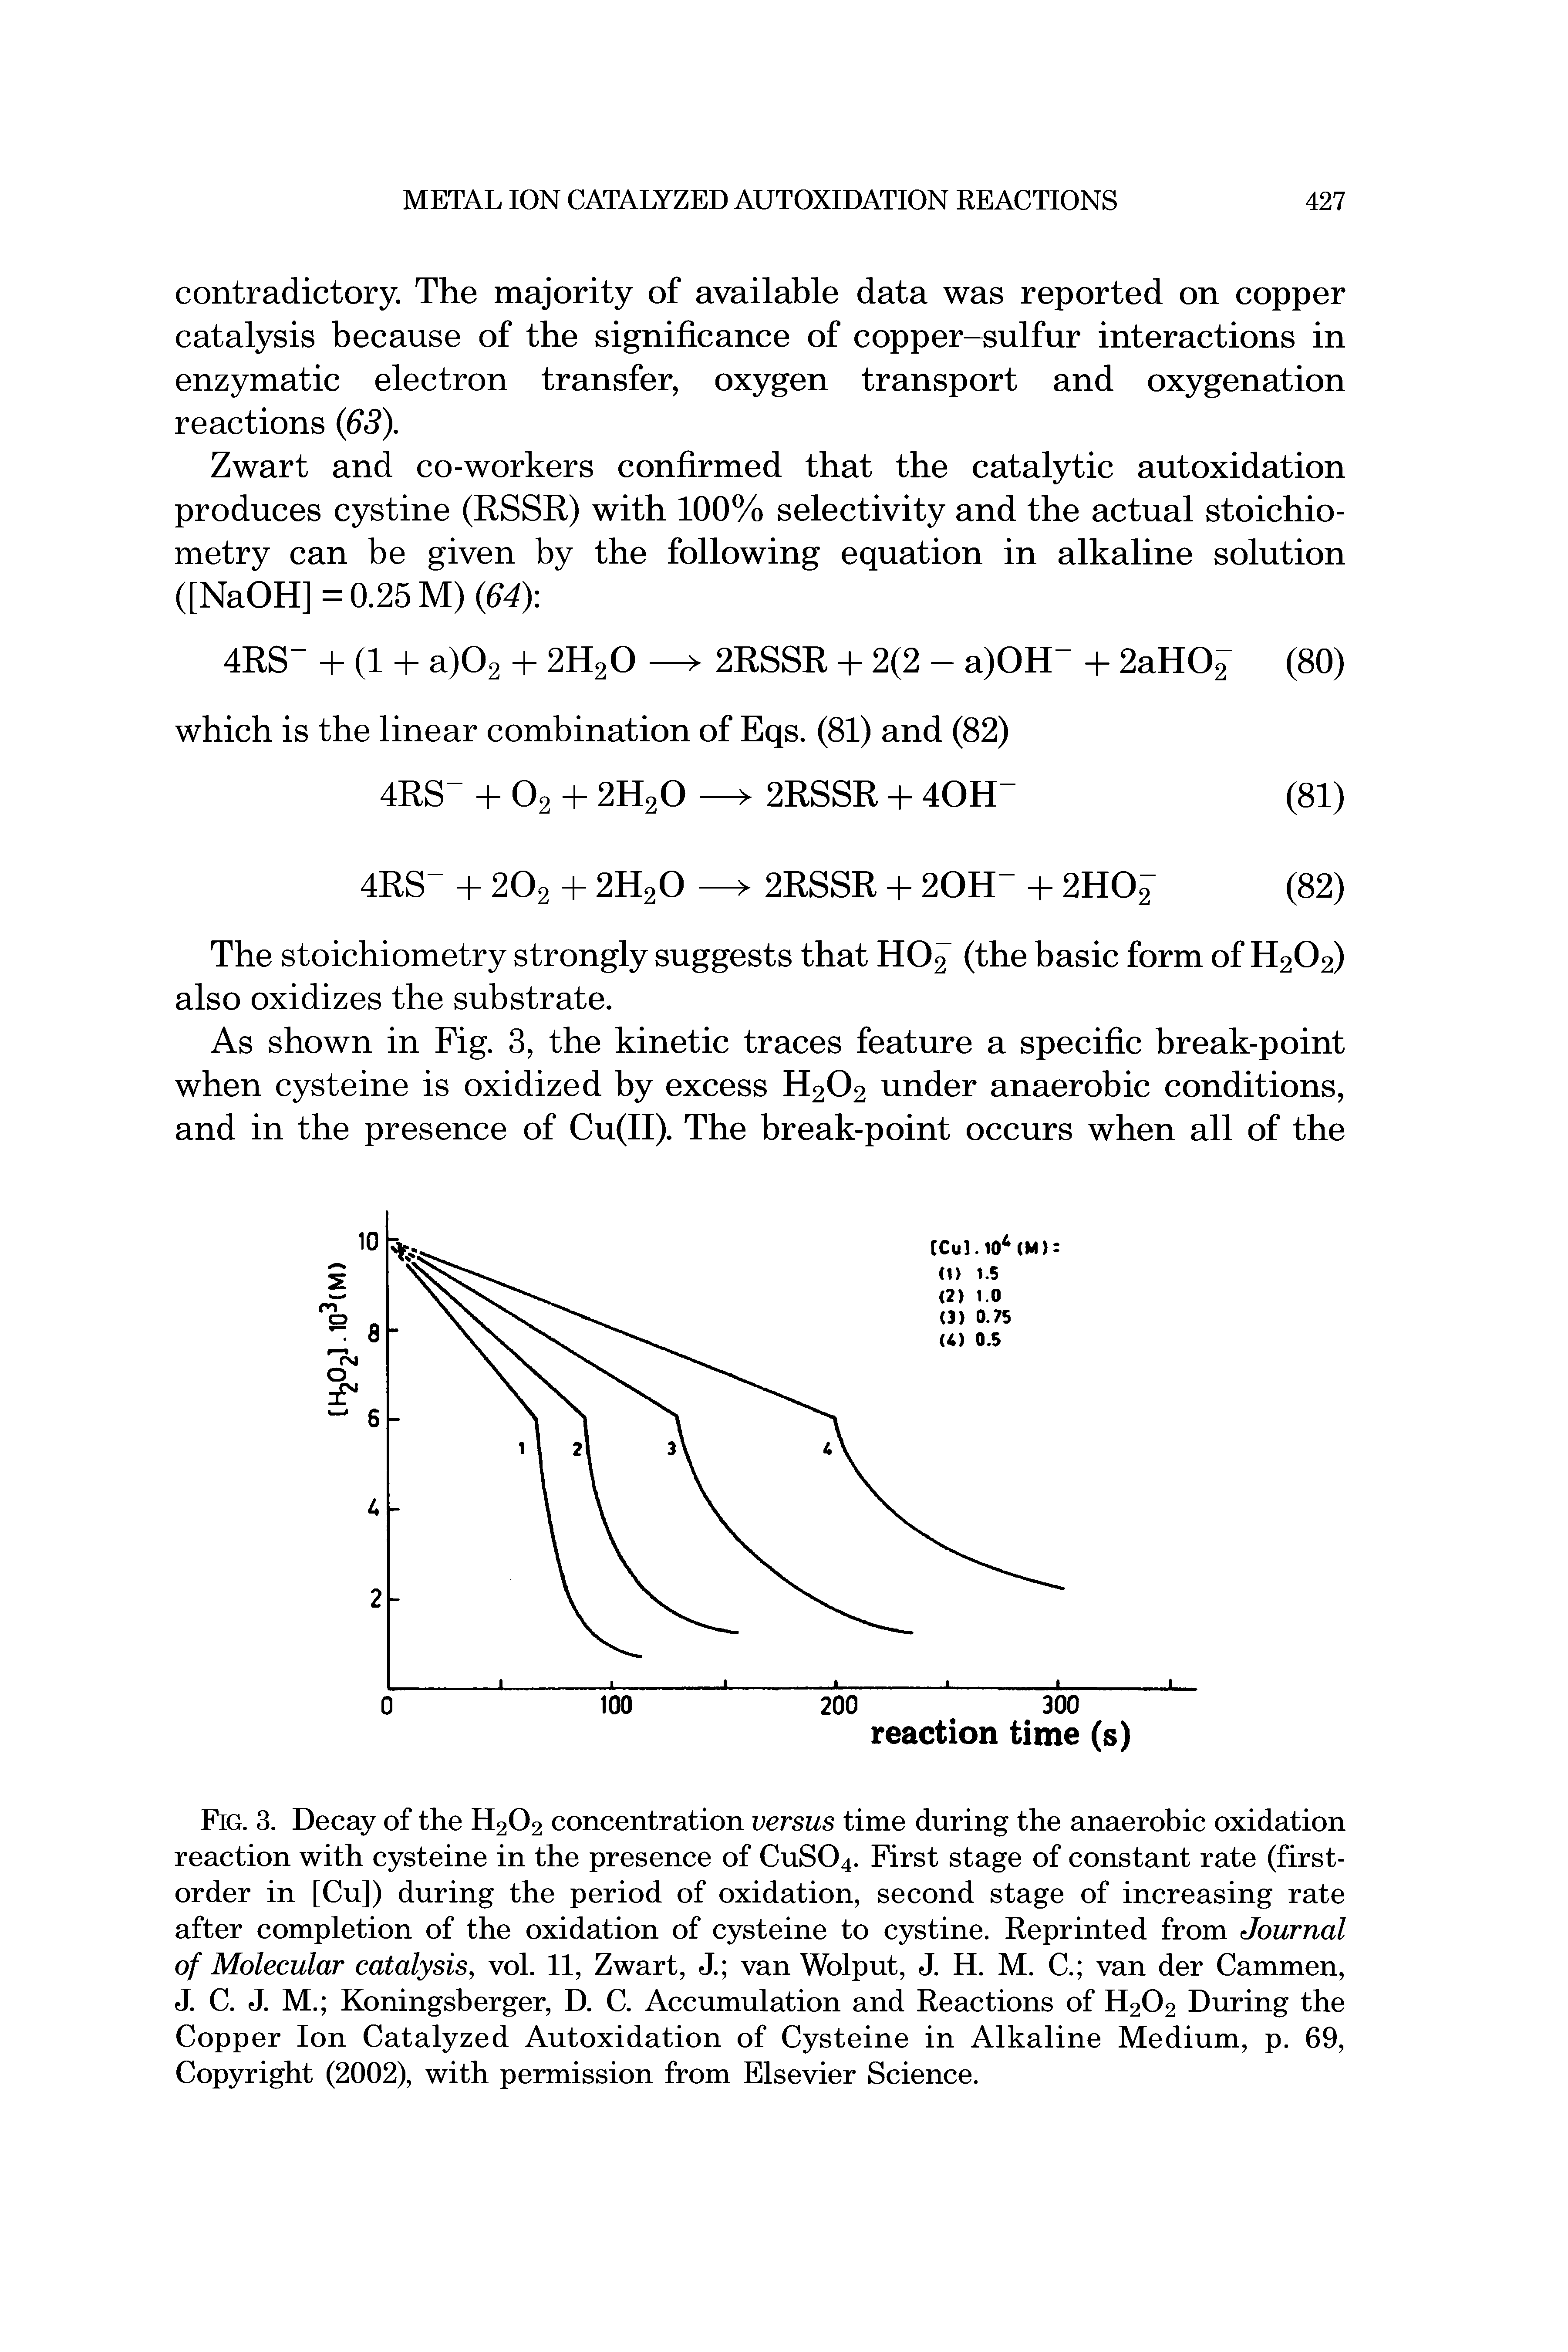 Fig. 3. Decay of the H202 concentration versus time during the anaerobic oxidation reaction with cysteine in the presence of CuS04. First stage of constant rate (first-order in [Cu]) during the period of oxidation, second stage of increasing rate after completion of the oxidation of cysteine to cystine. Reprinted from Journal of Molecular catalysis, vol. 11, Zwart, J. van Wolput, J. H. M. C. van der Cammen, J. C. J. M. Koningsberger, D. C. Accumulation and Reactions of H202 During the Copper Ion Catalyzed Autoxidation of Cysteine in Alkaline Medium, p. 69, Copyright (2002), with permission from Elsevier Science.